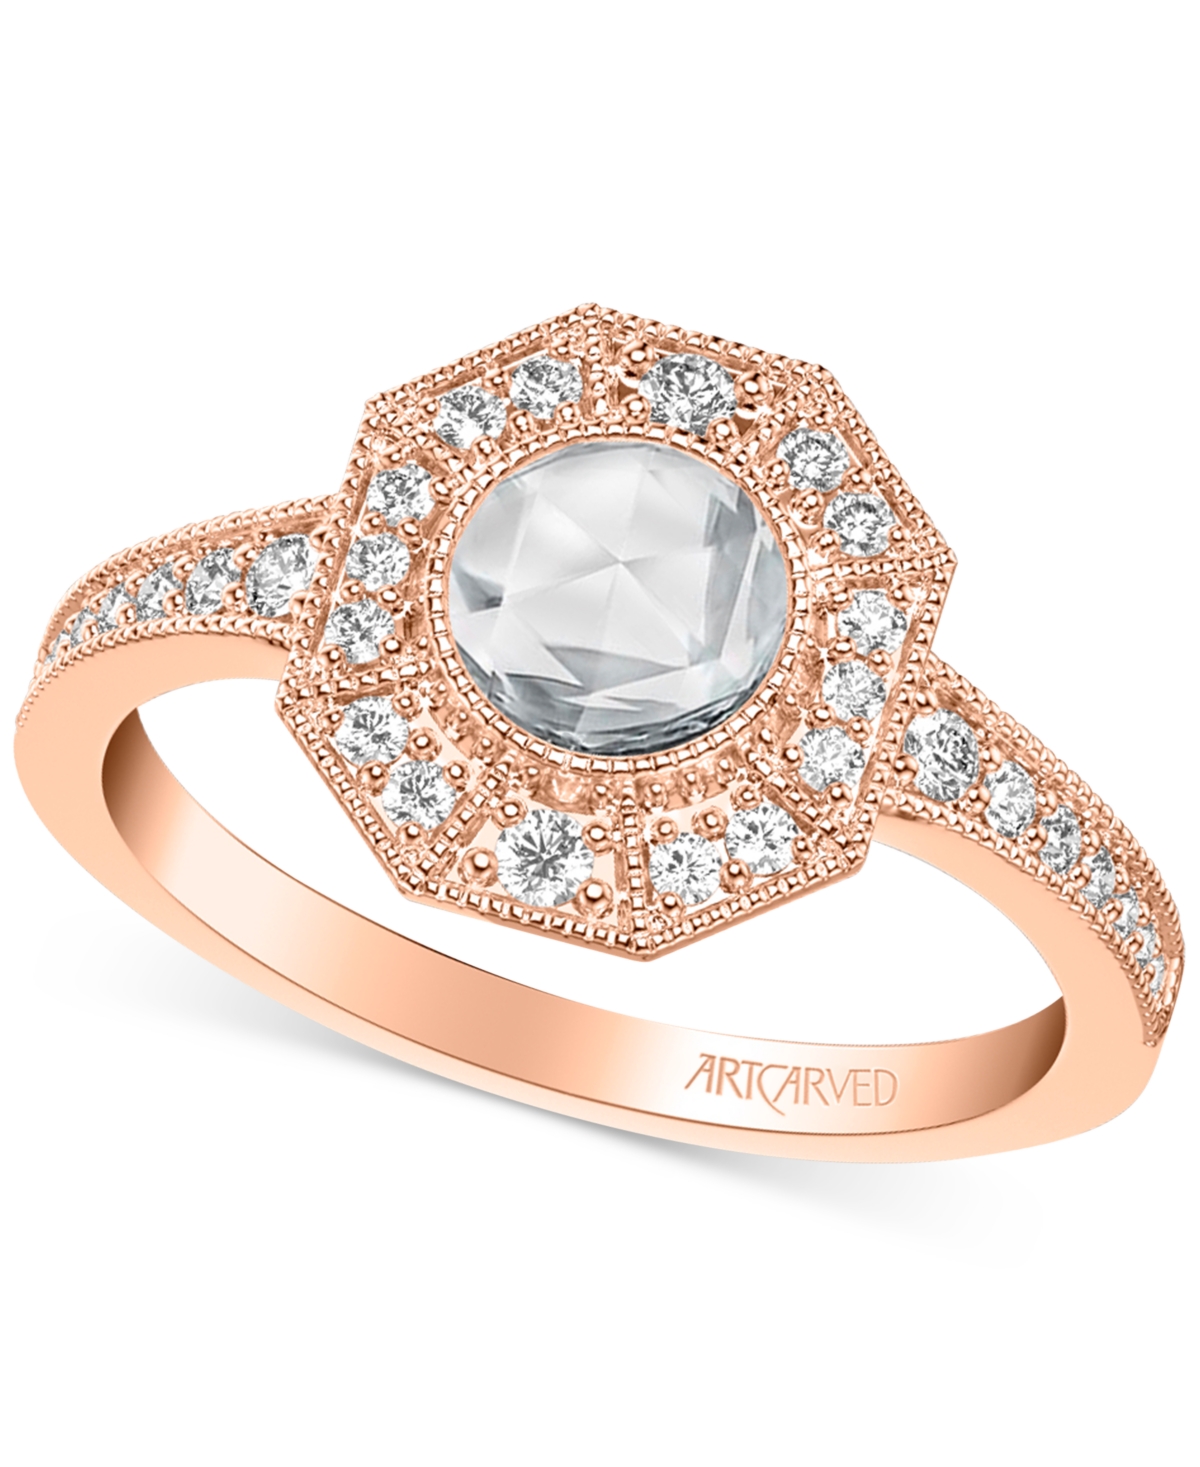 Artcarved Art Carved Diamond Rose-Cut Halo Engagement Ring (3/4 ct. t.w.) in 14k White, Yellow or Rose Gold